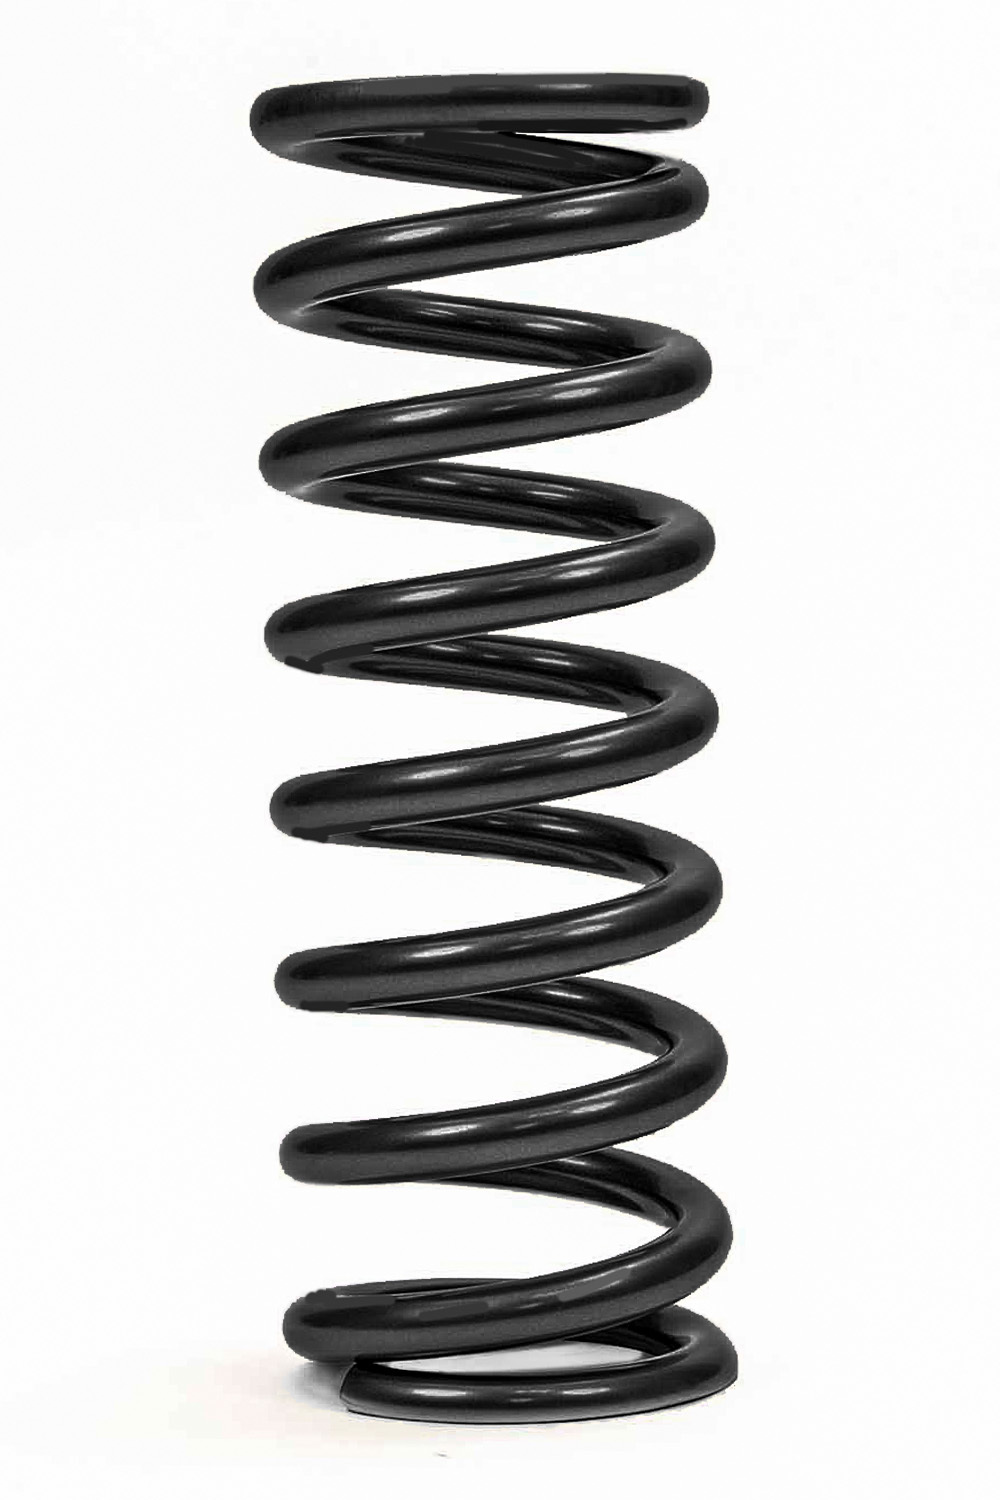 QA1 10HT100B Coil Spring, Coil-Over, 2.500 in ID, 10.000 in Length, 100 lb/in Spring Rate, Steel, Black Powder Coat, Each